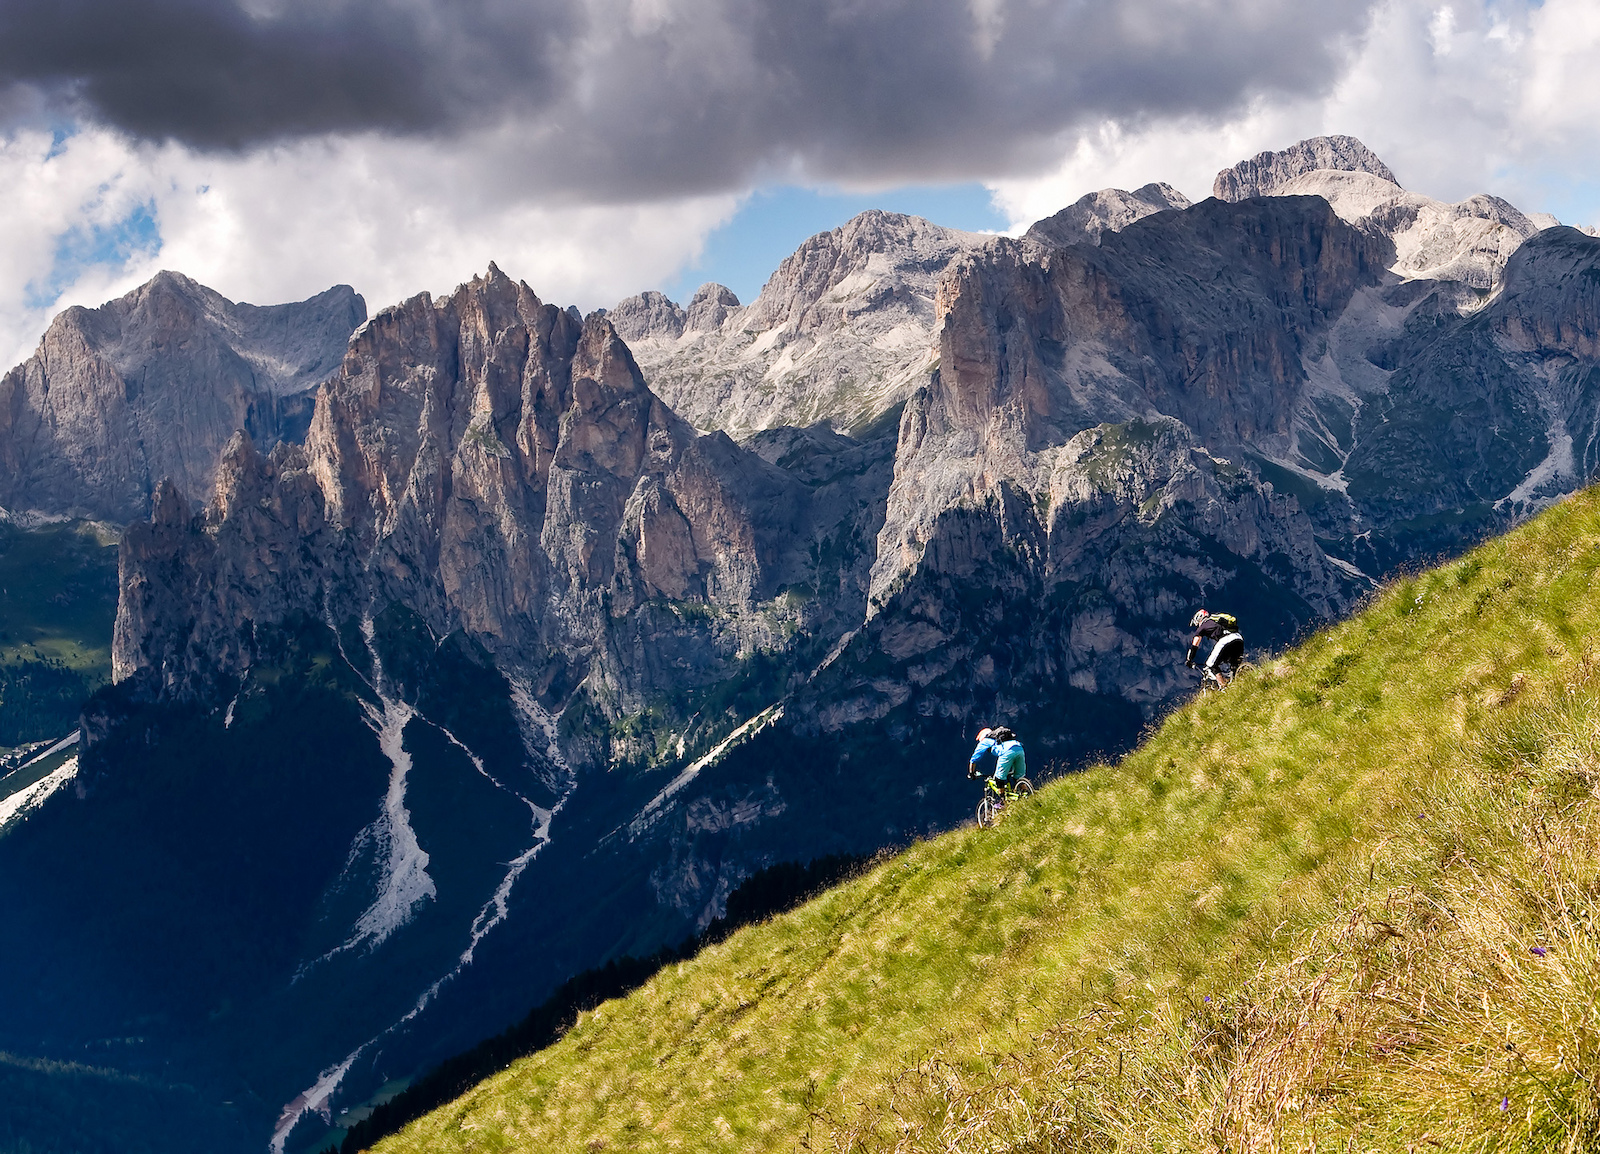 Situated in the heart of the dolomites, at the foot of the Sella massif. Here, Fassa Marketing manager, ex-snowboard professional and general cool dude Mauro (AKA Ninja) leads WorldBikeParks.com rider David Scorer down a phenomenal ridgeline high above Pozza.